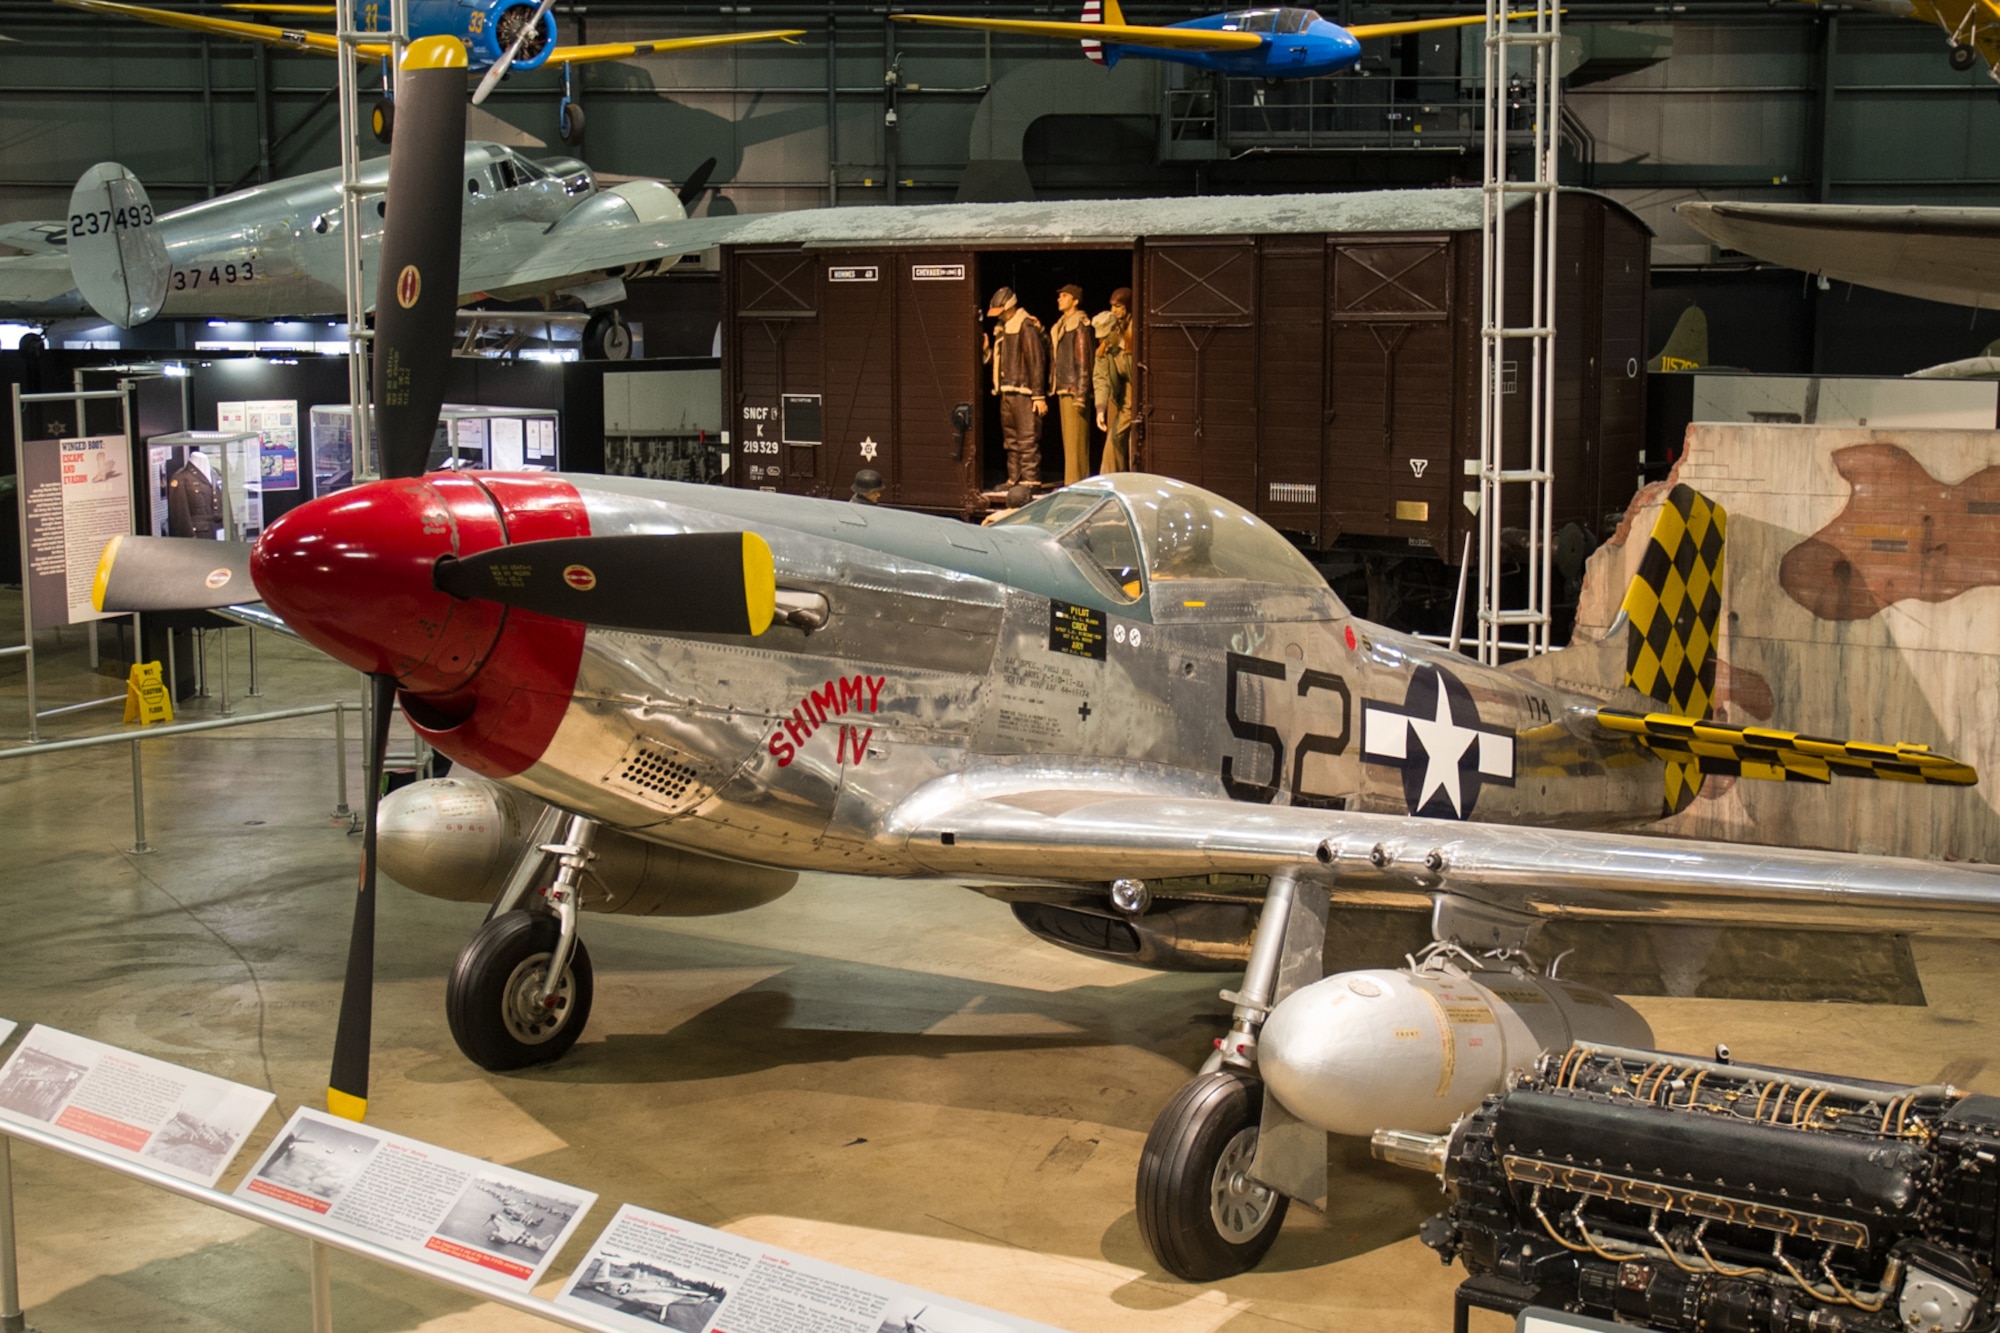 DAYTON, Ohio -- North American P-51D Mustang in the World War II Gallery at the National Museum of the United States Air Force. (U.S. Air Force photo)